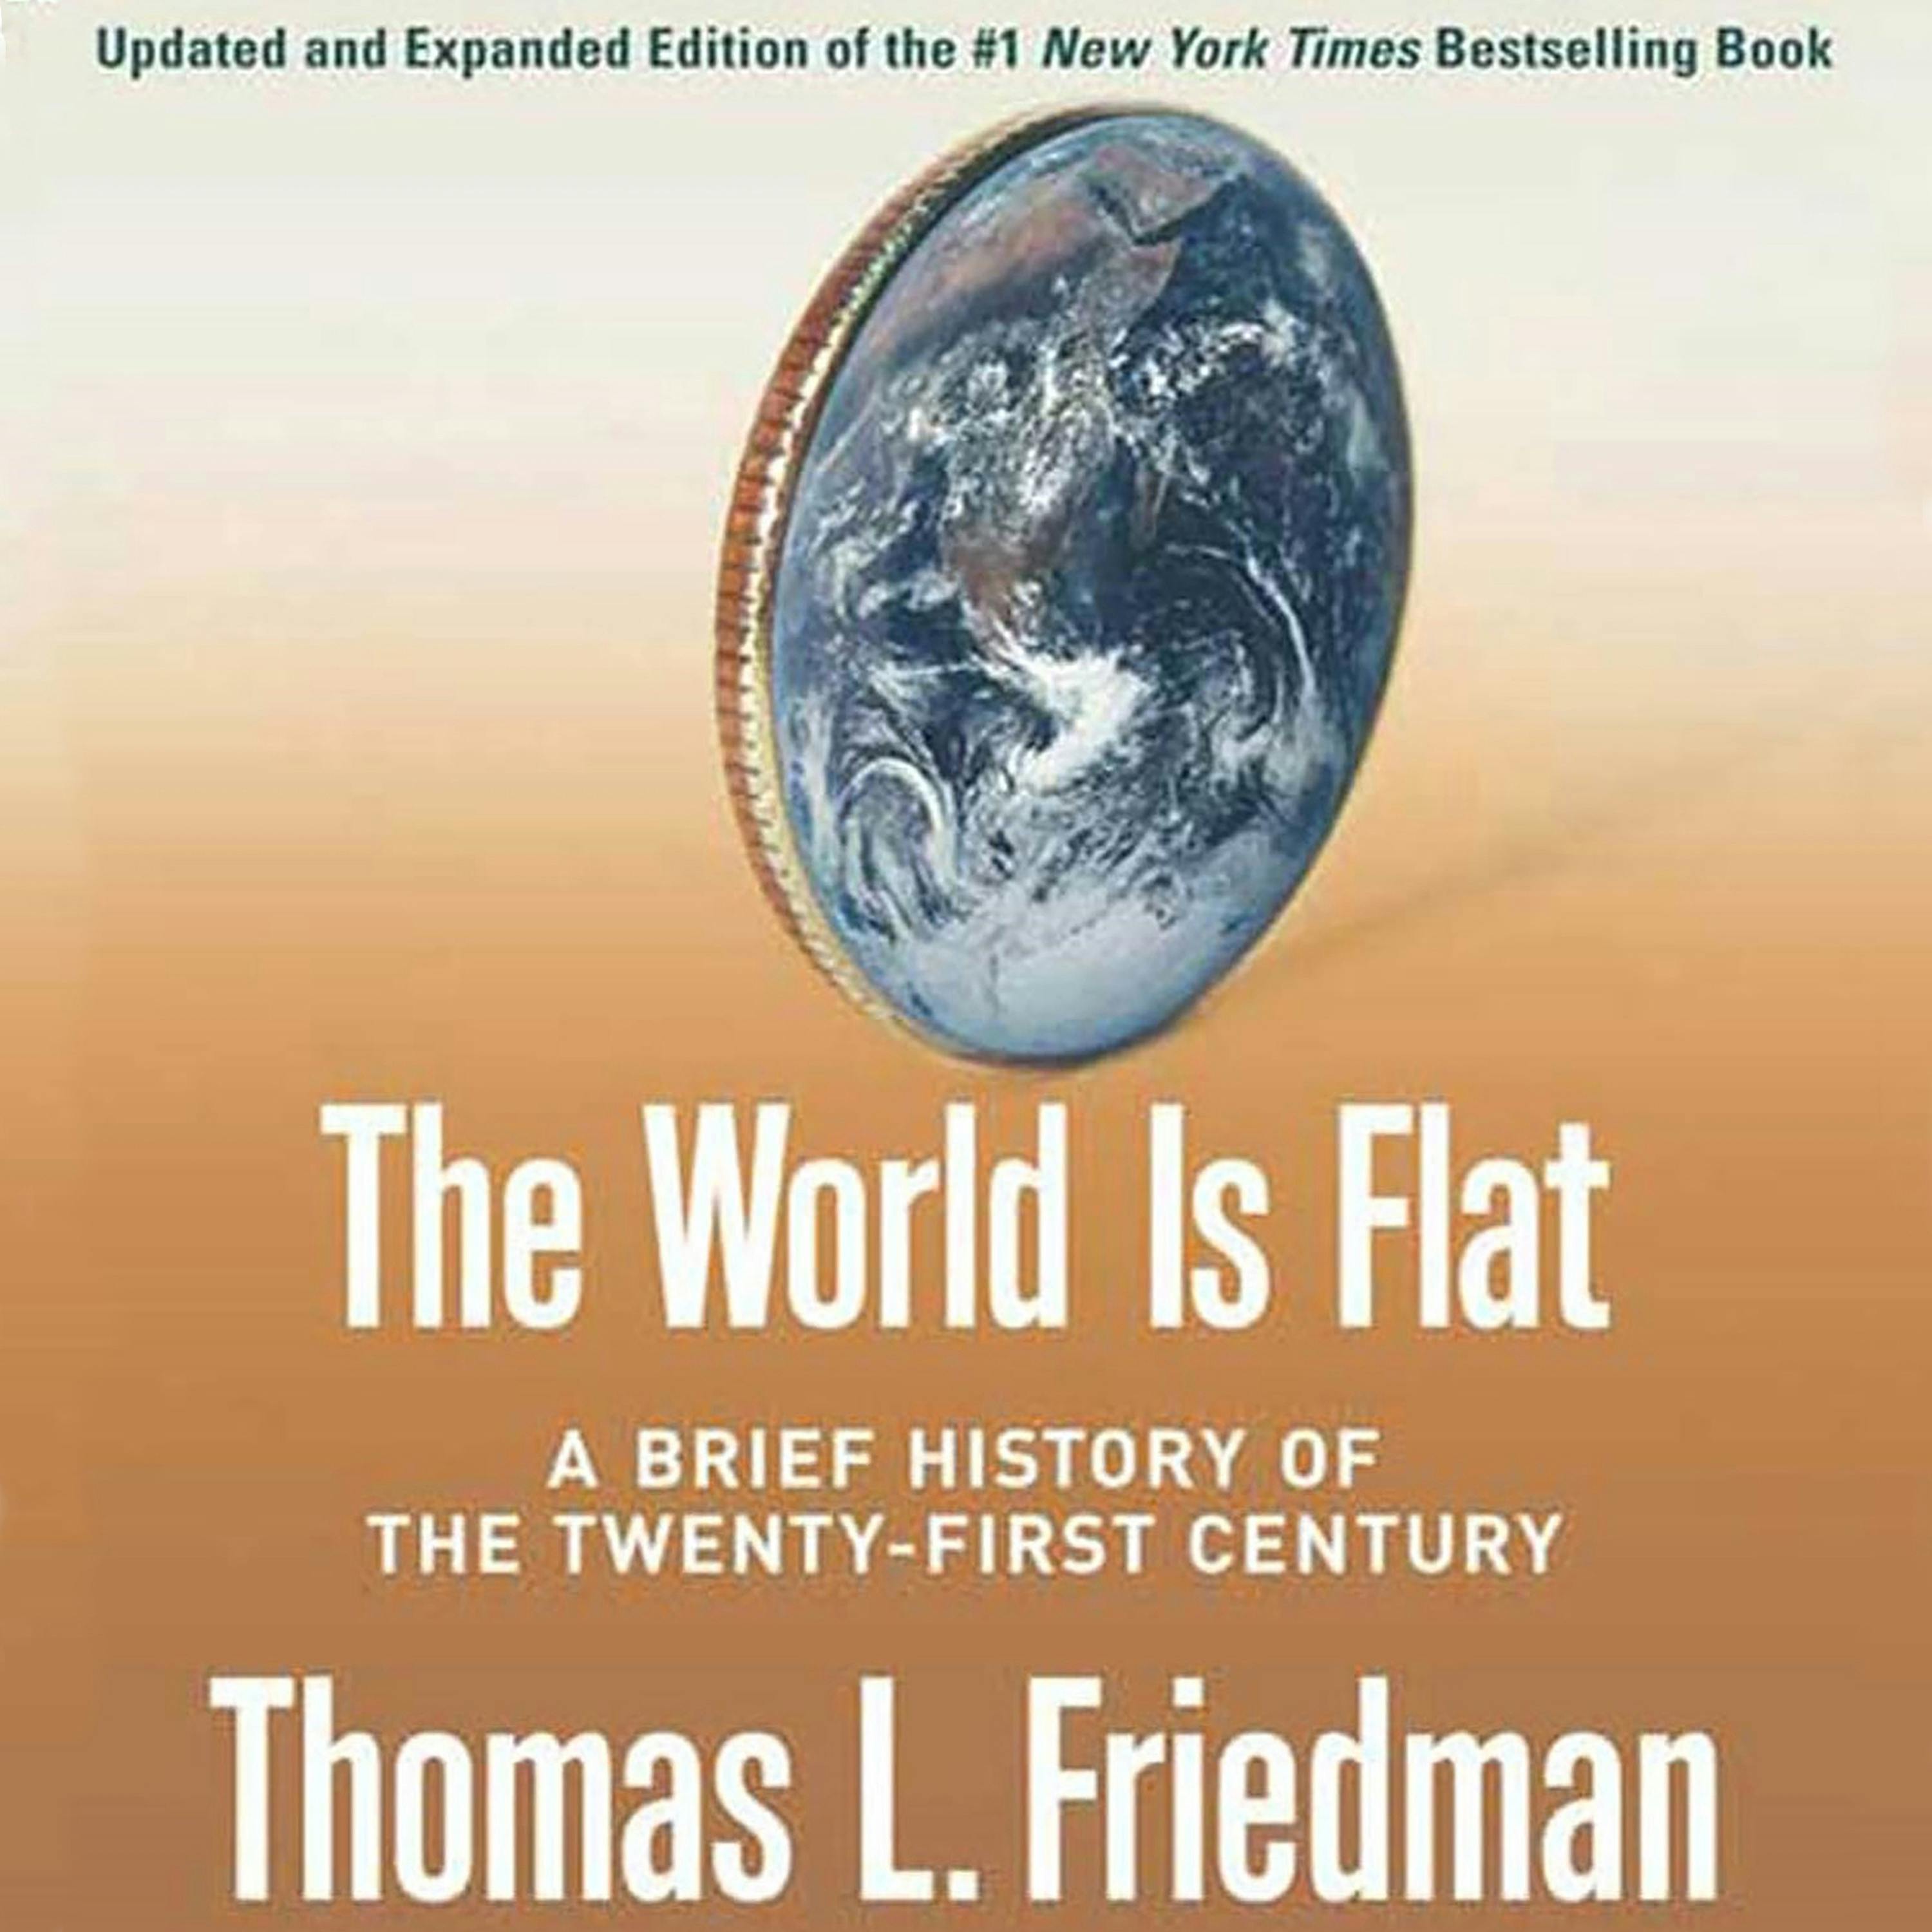 Twenty first century. The World is Flat книга. Flat World book. Thomas l. Friedman the New York times. A brief History of time.